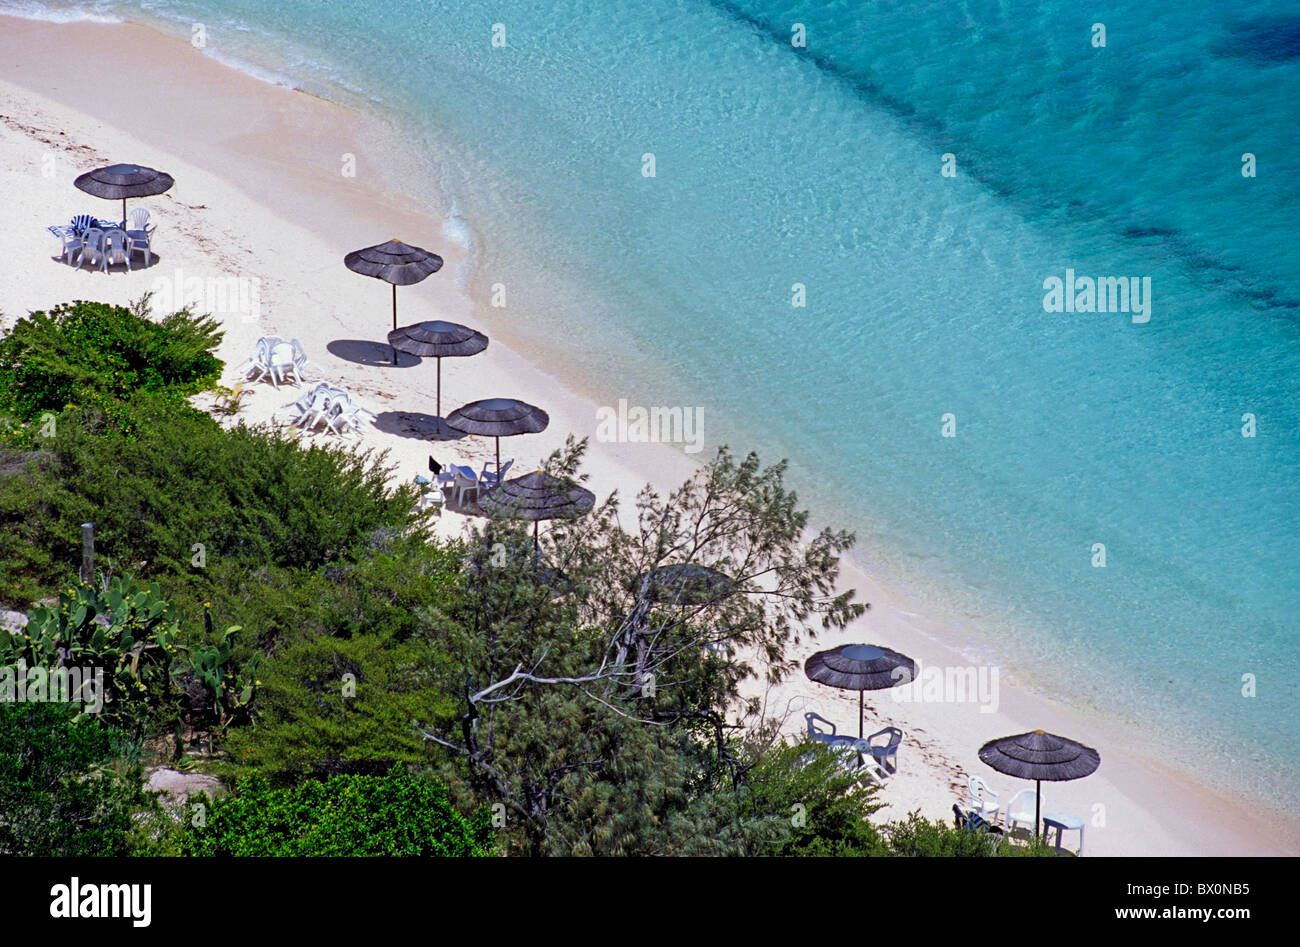 Sun umbrellas dotted along the white sand beach on Amedee Island, New Caledonia, Pacific Ocean Islands. Stock Photo